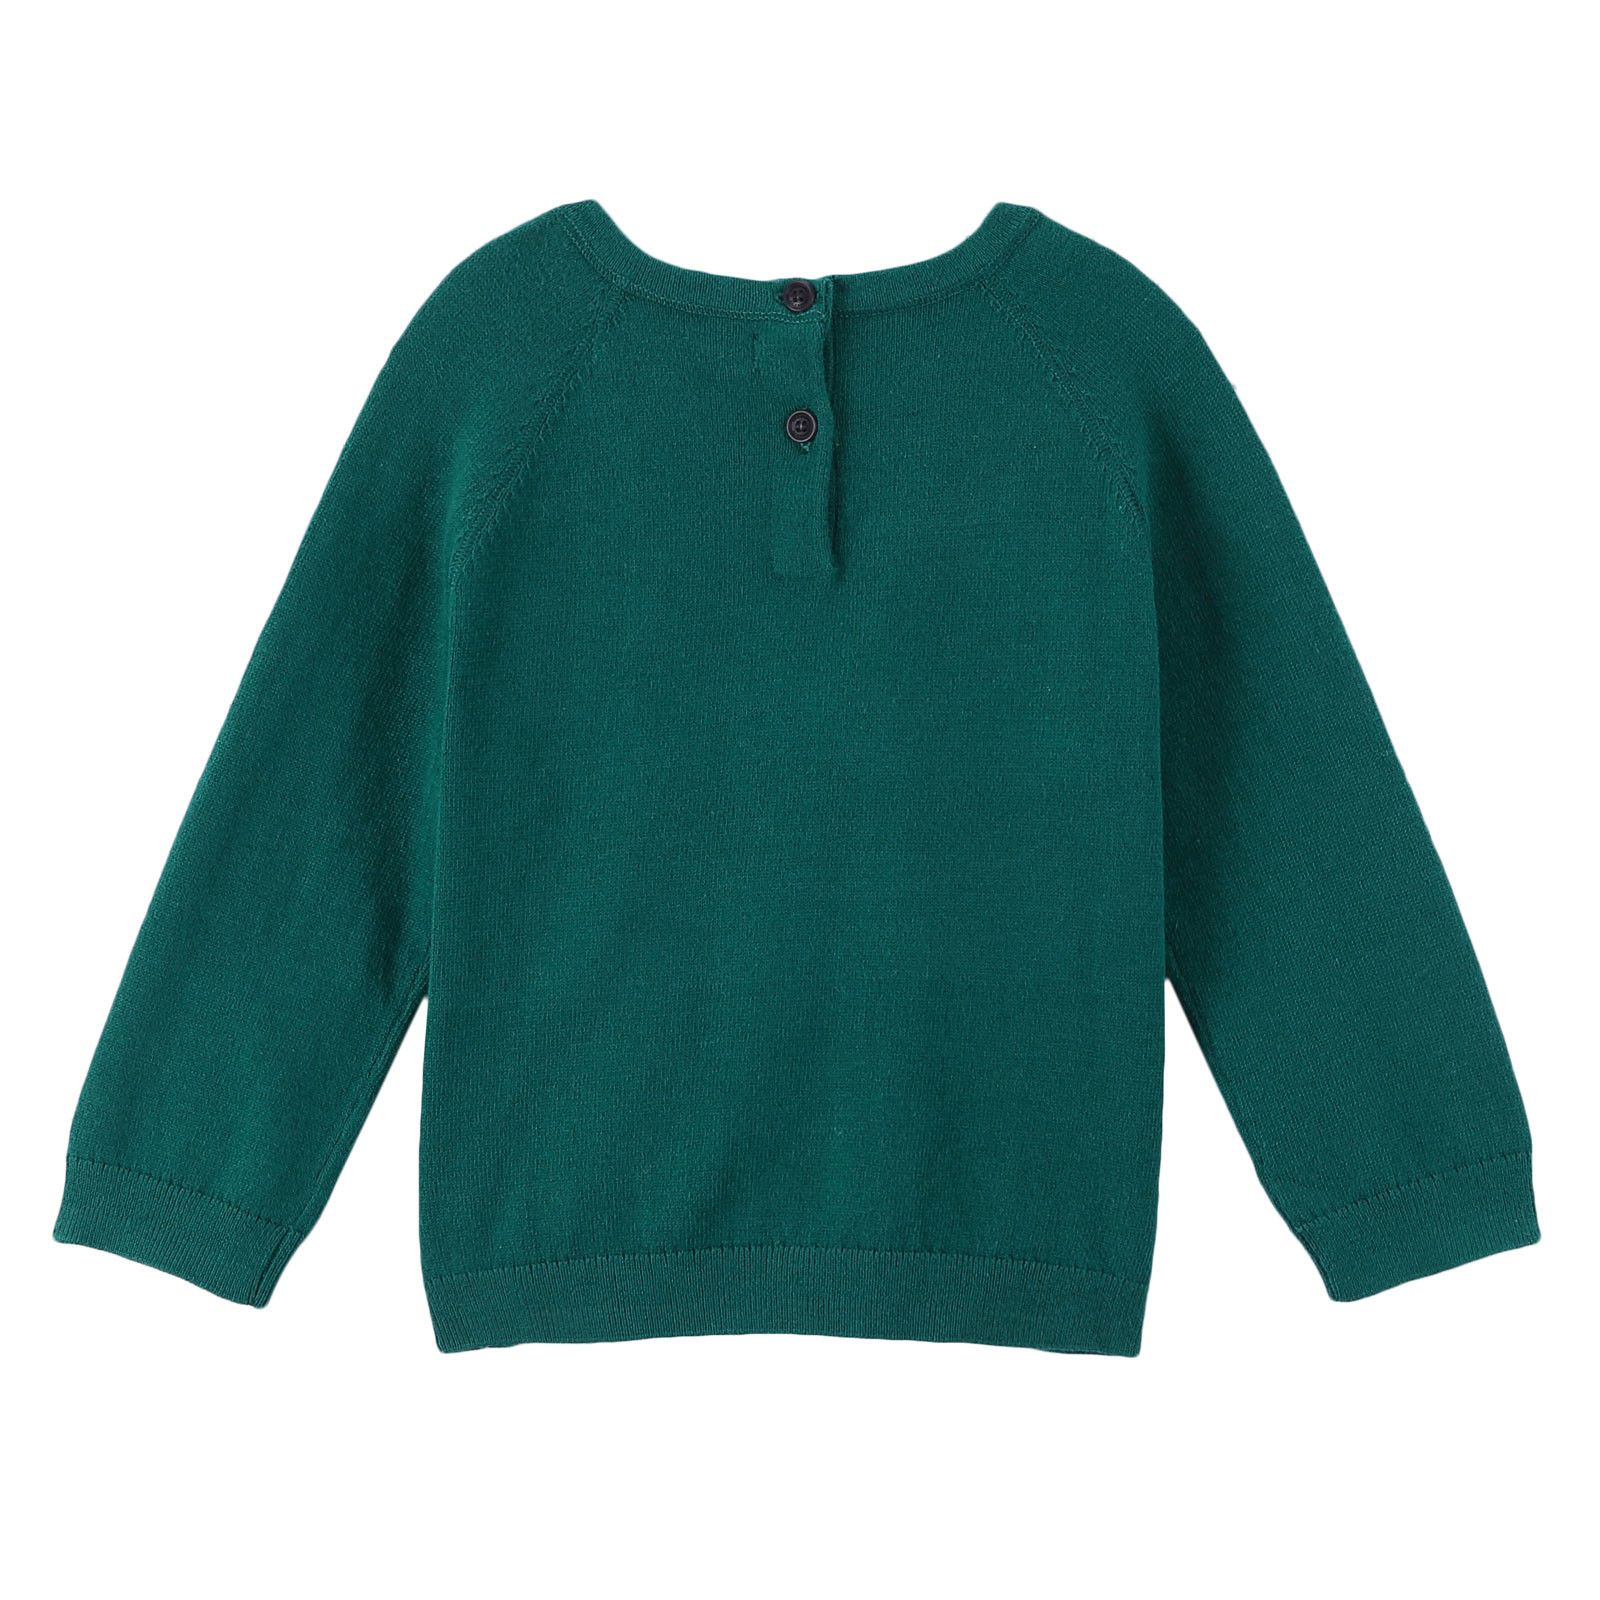 Baby Boys Deep Viridian Green Knitted Cotton Sweater - CÉMAROSE | Children's Fashion Store - 2